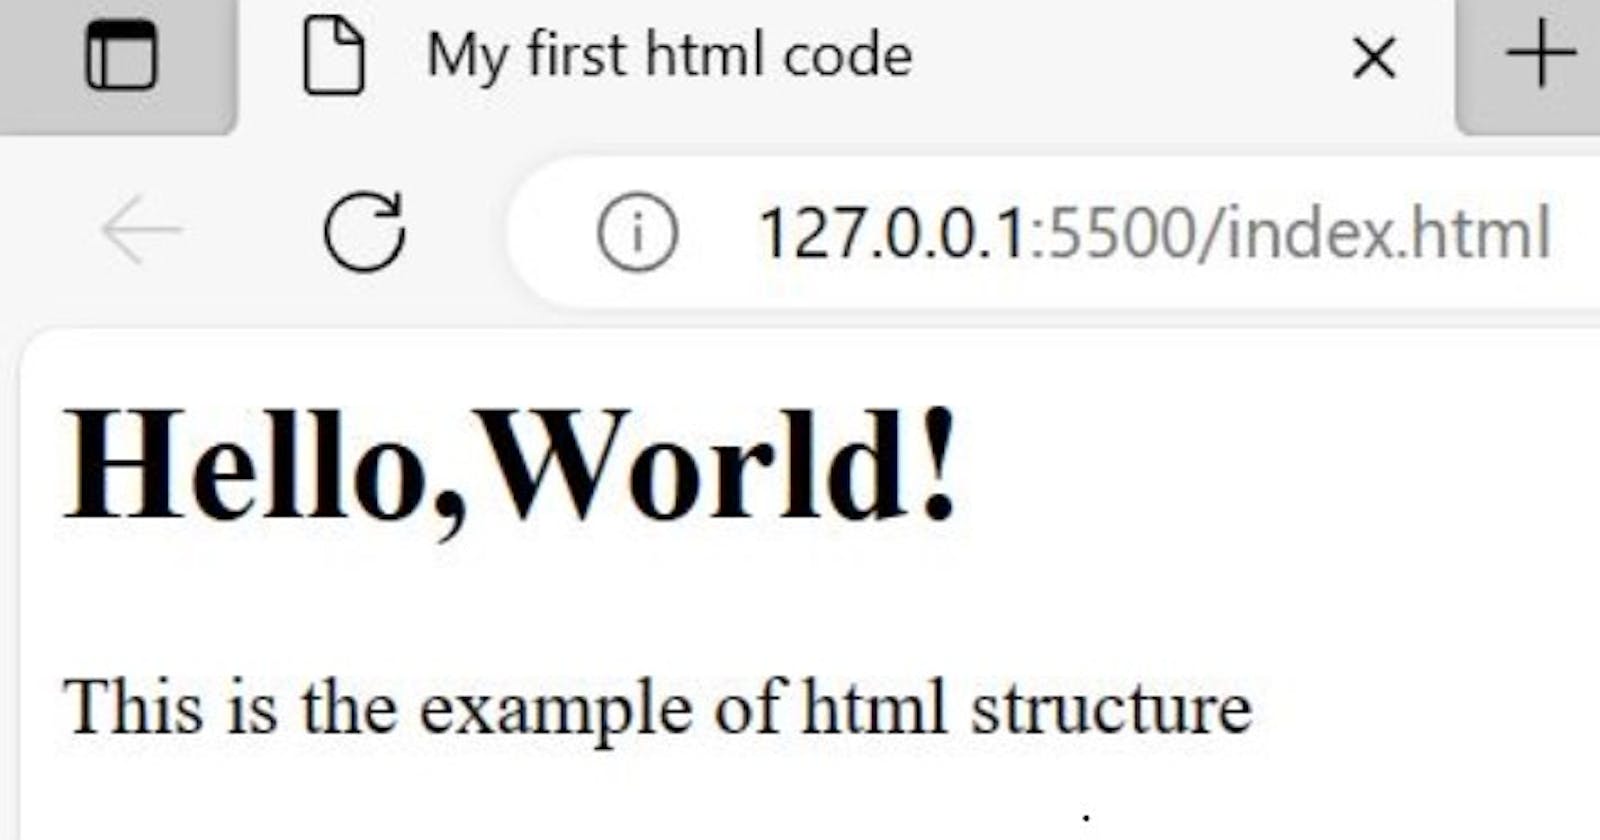 Html structure